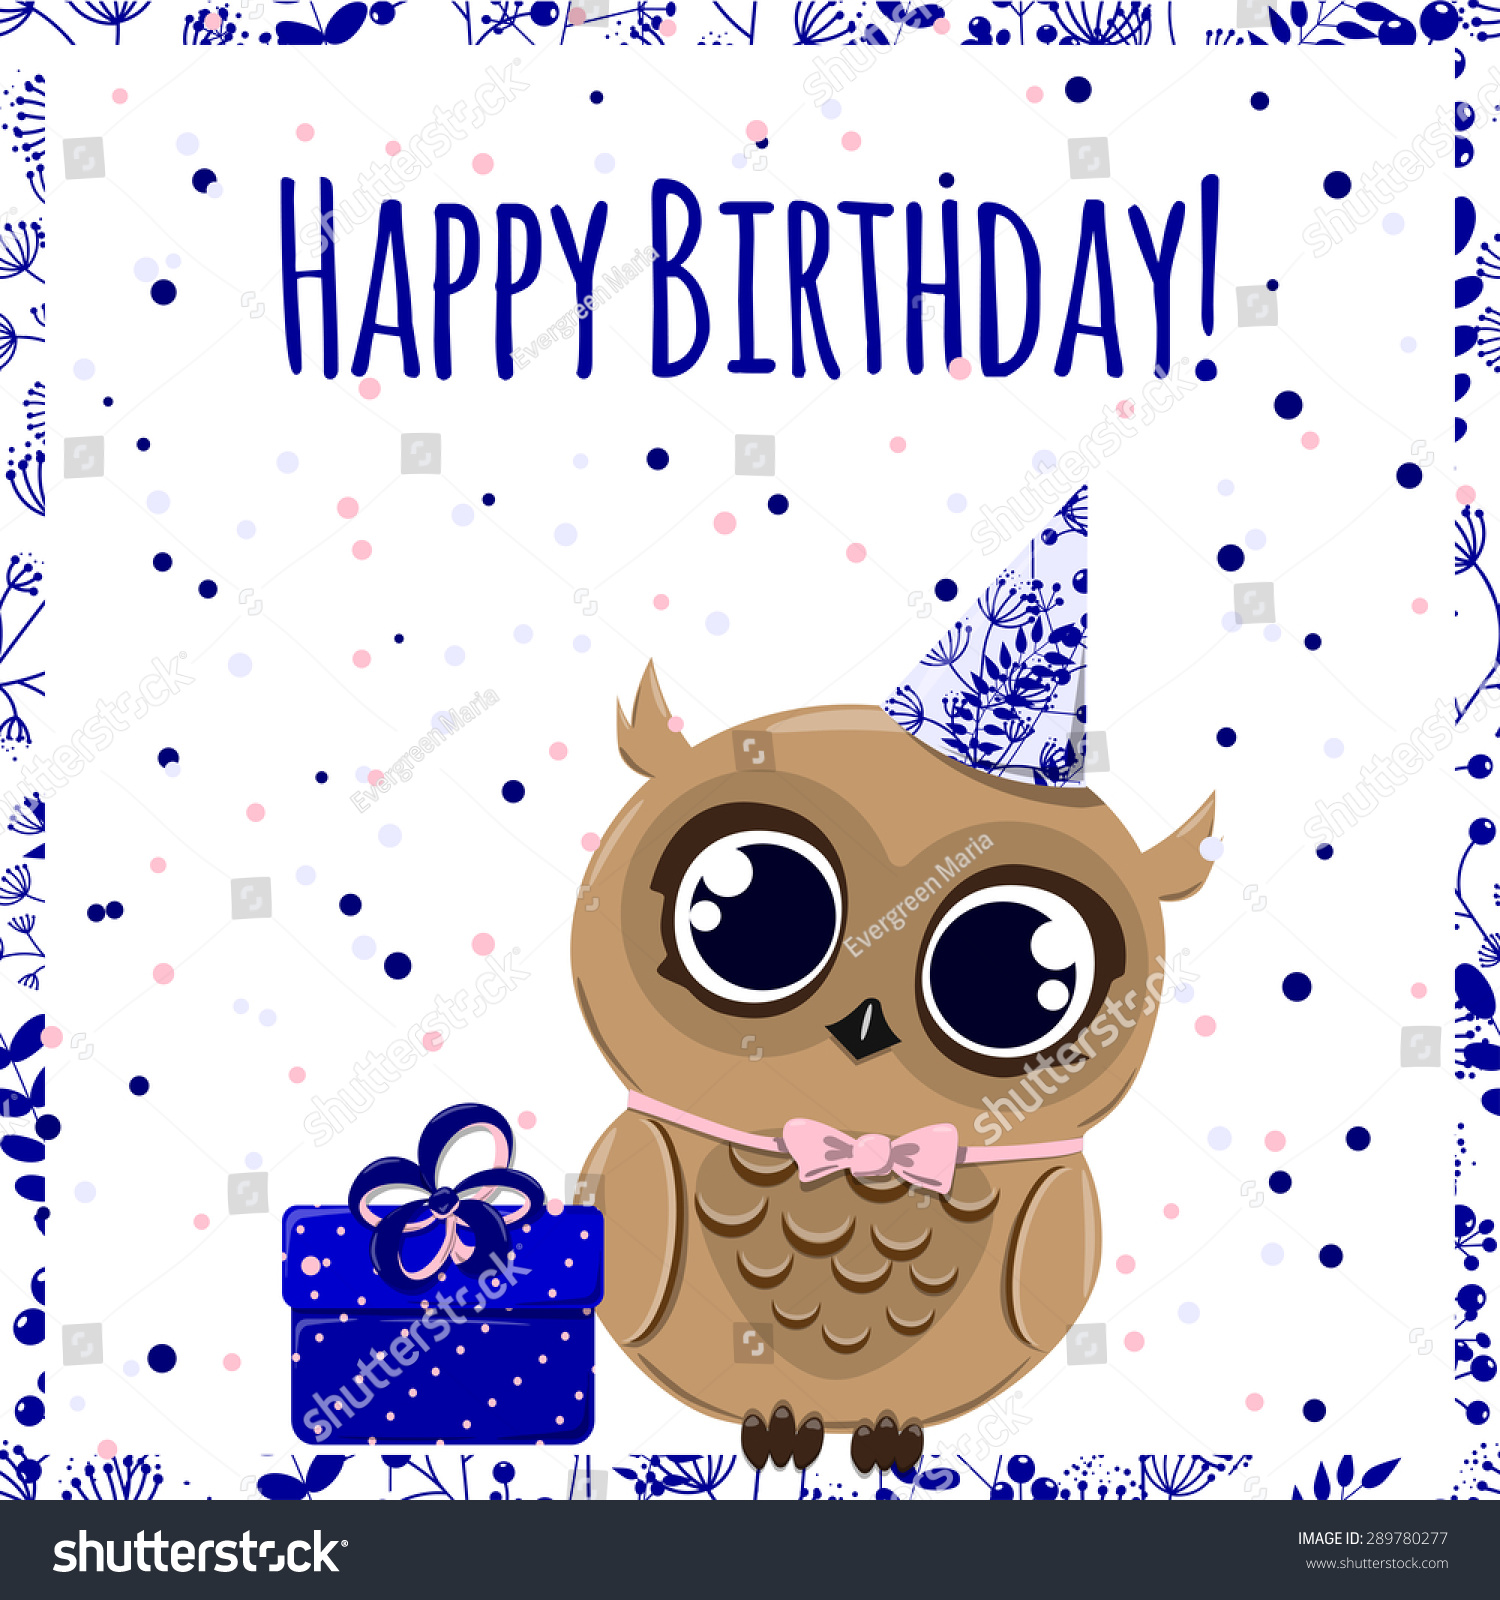 Cute Happy Birthday Card With Owl In Hat And With Gift. Vector ...